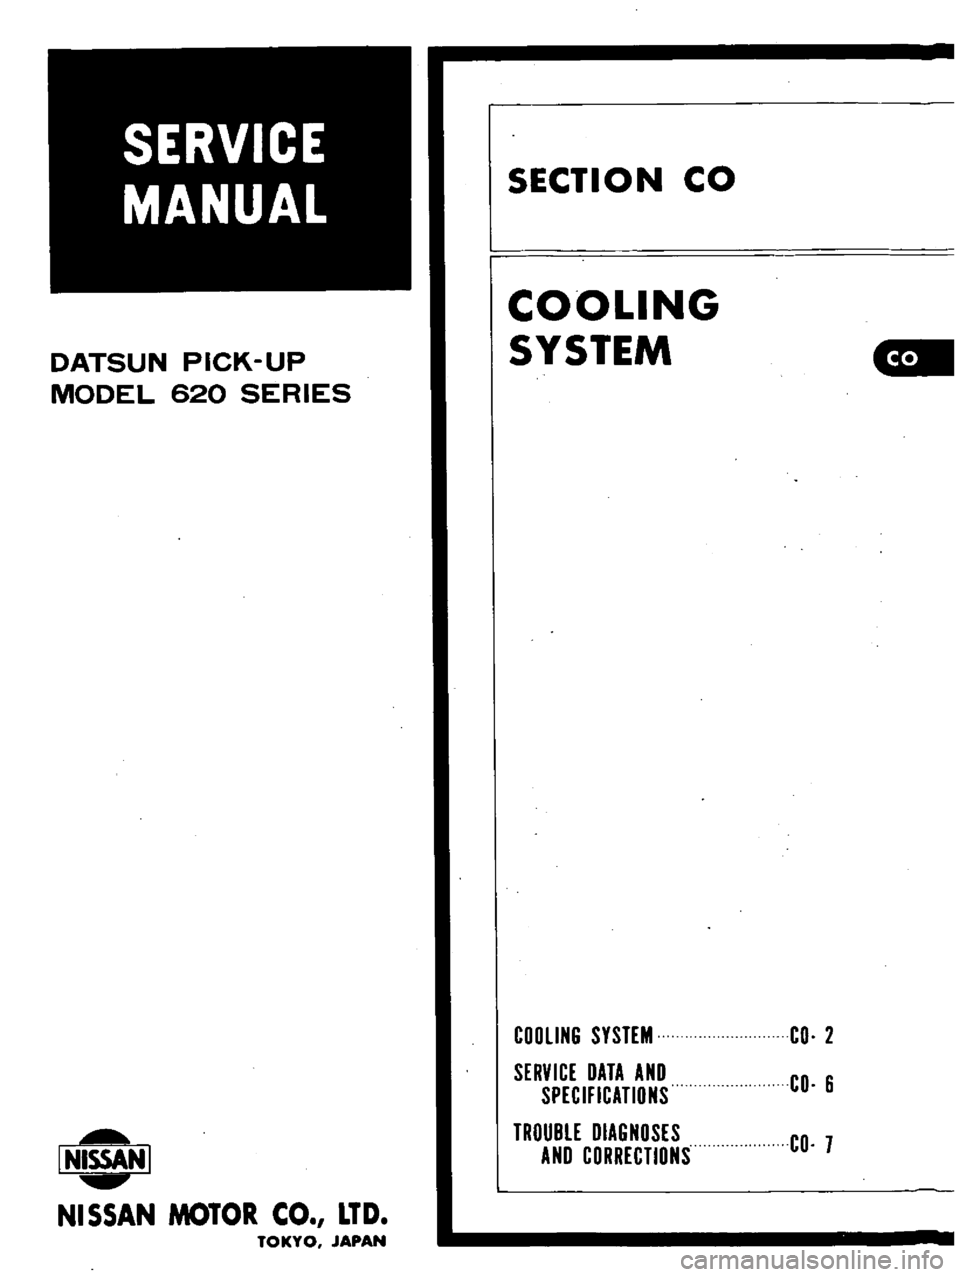 DATSUN PICK-UP 1977  Service Manual 
DATSUN 
PICK 
UP

MODEL 
620

SERIES

L 
NISSAN

I

NISSAN 
MOTOR 
CO 
LTD

TOKYO 
JAPAN 
SECTION 
CO

COOLING

SYSTEM

COOLING 
SYSTEM

SERVICE 
DATA

AND

SPECIFICATIONS

TROUBLE 
DIAGNOSES

AND

C